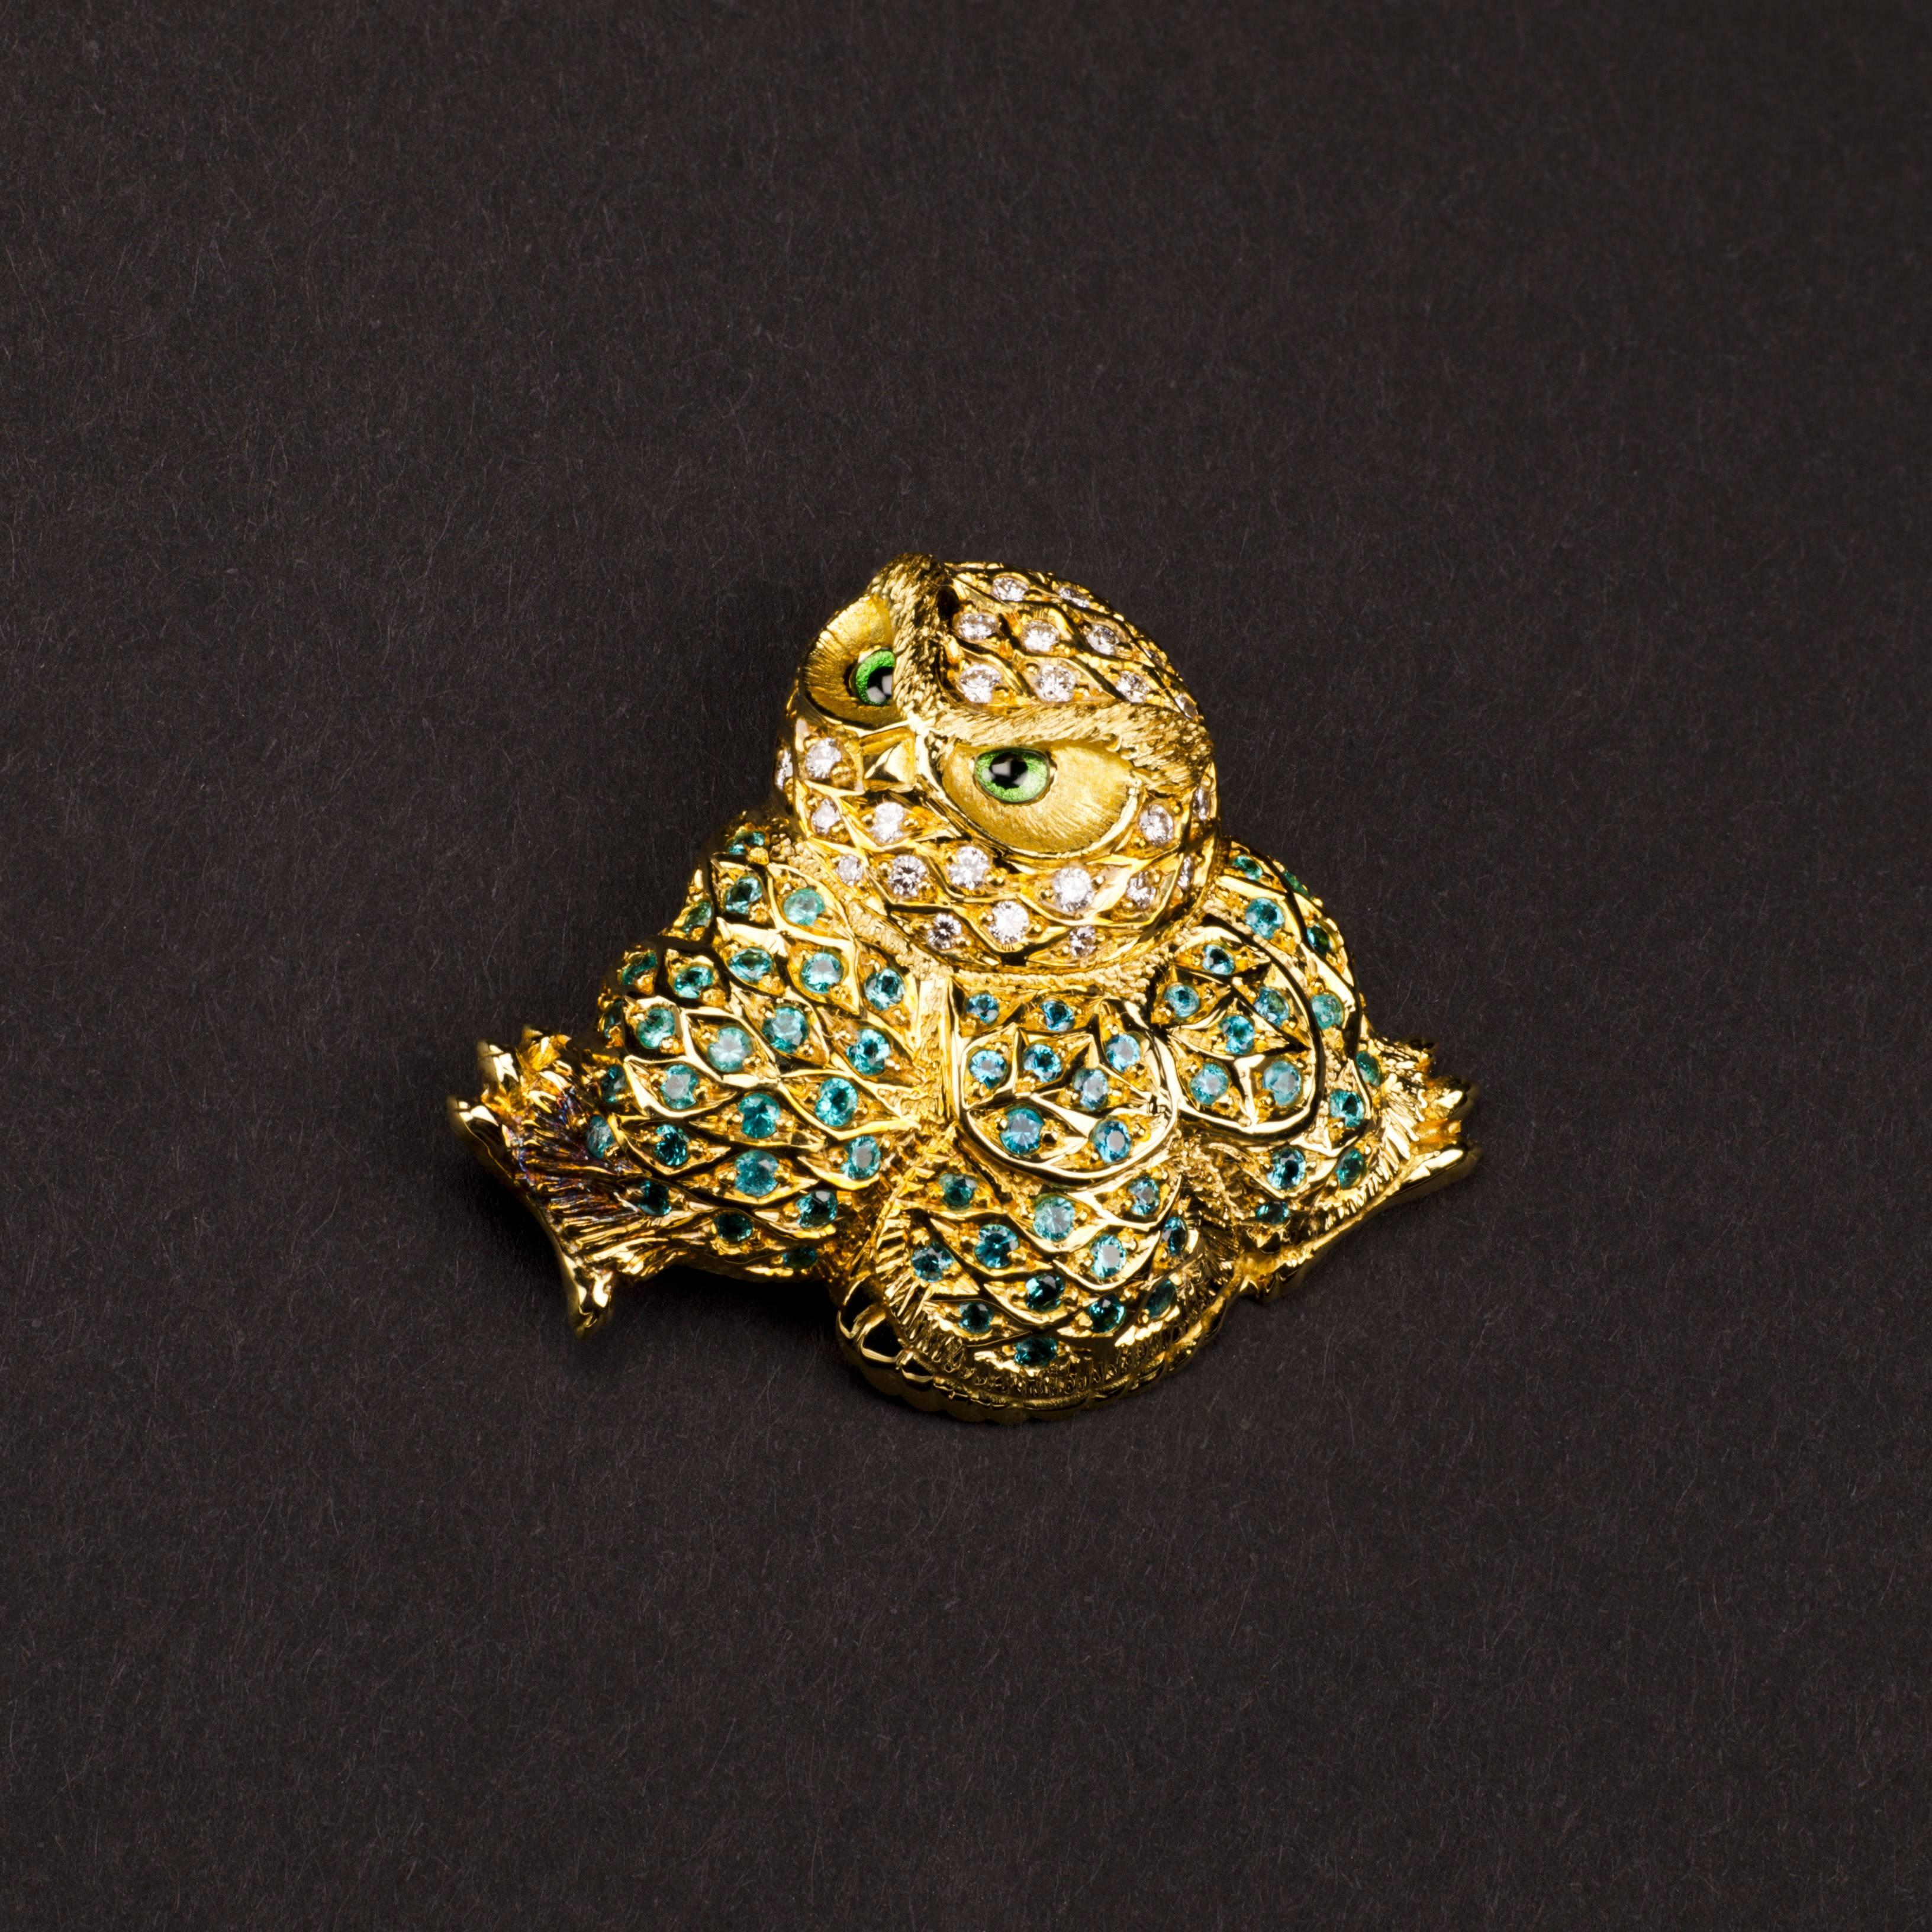 An intricate and highly decorative 18ct yellow gold owl brooch encrusted with precious Paraiba tourmalines with diamonds.

This fabulously regal and wise looking owl is an exclusive Henn design collaboration with master gemstone carver Alfred